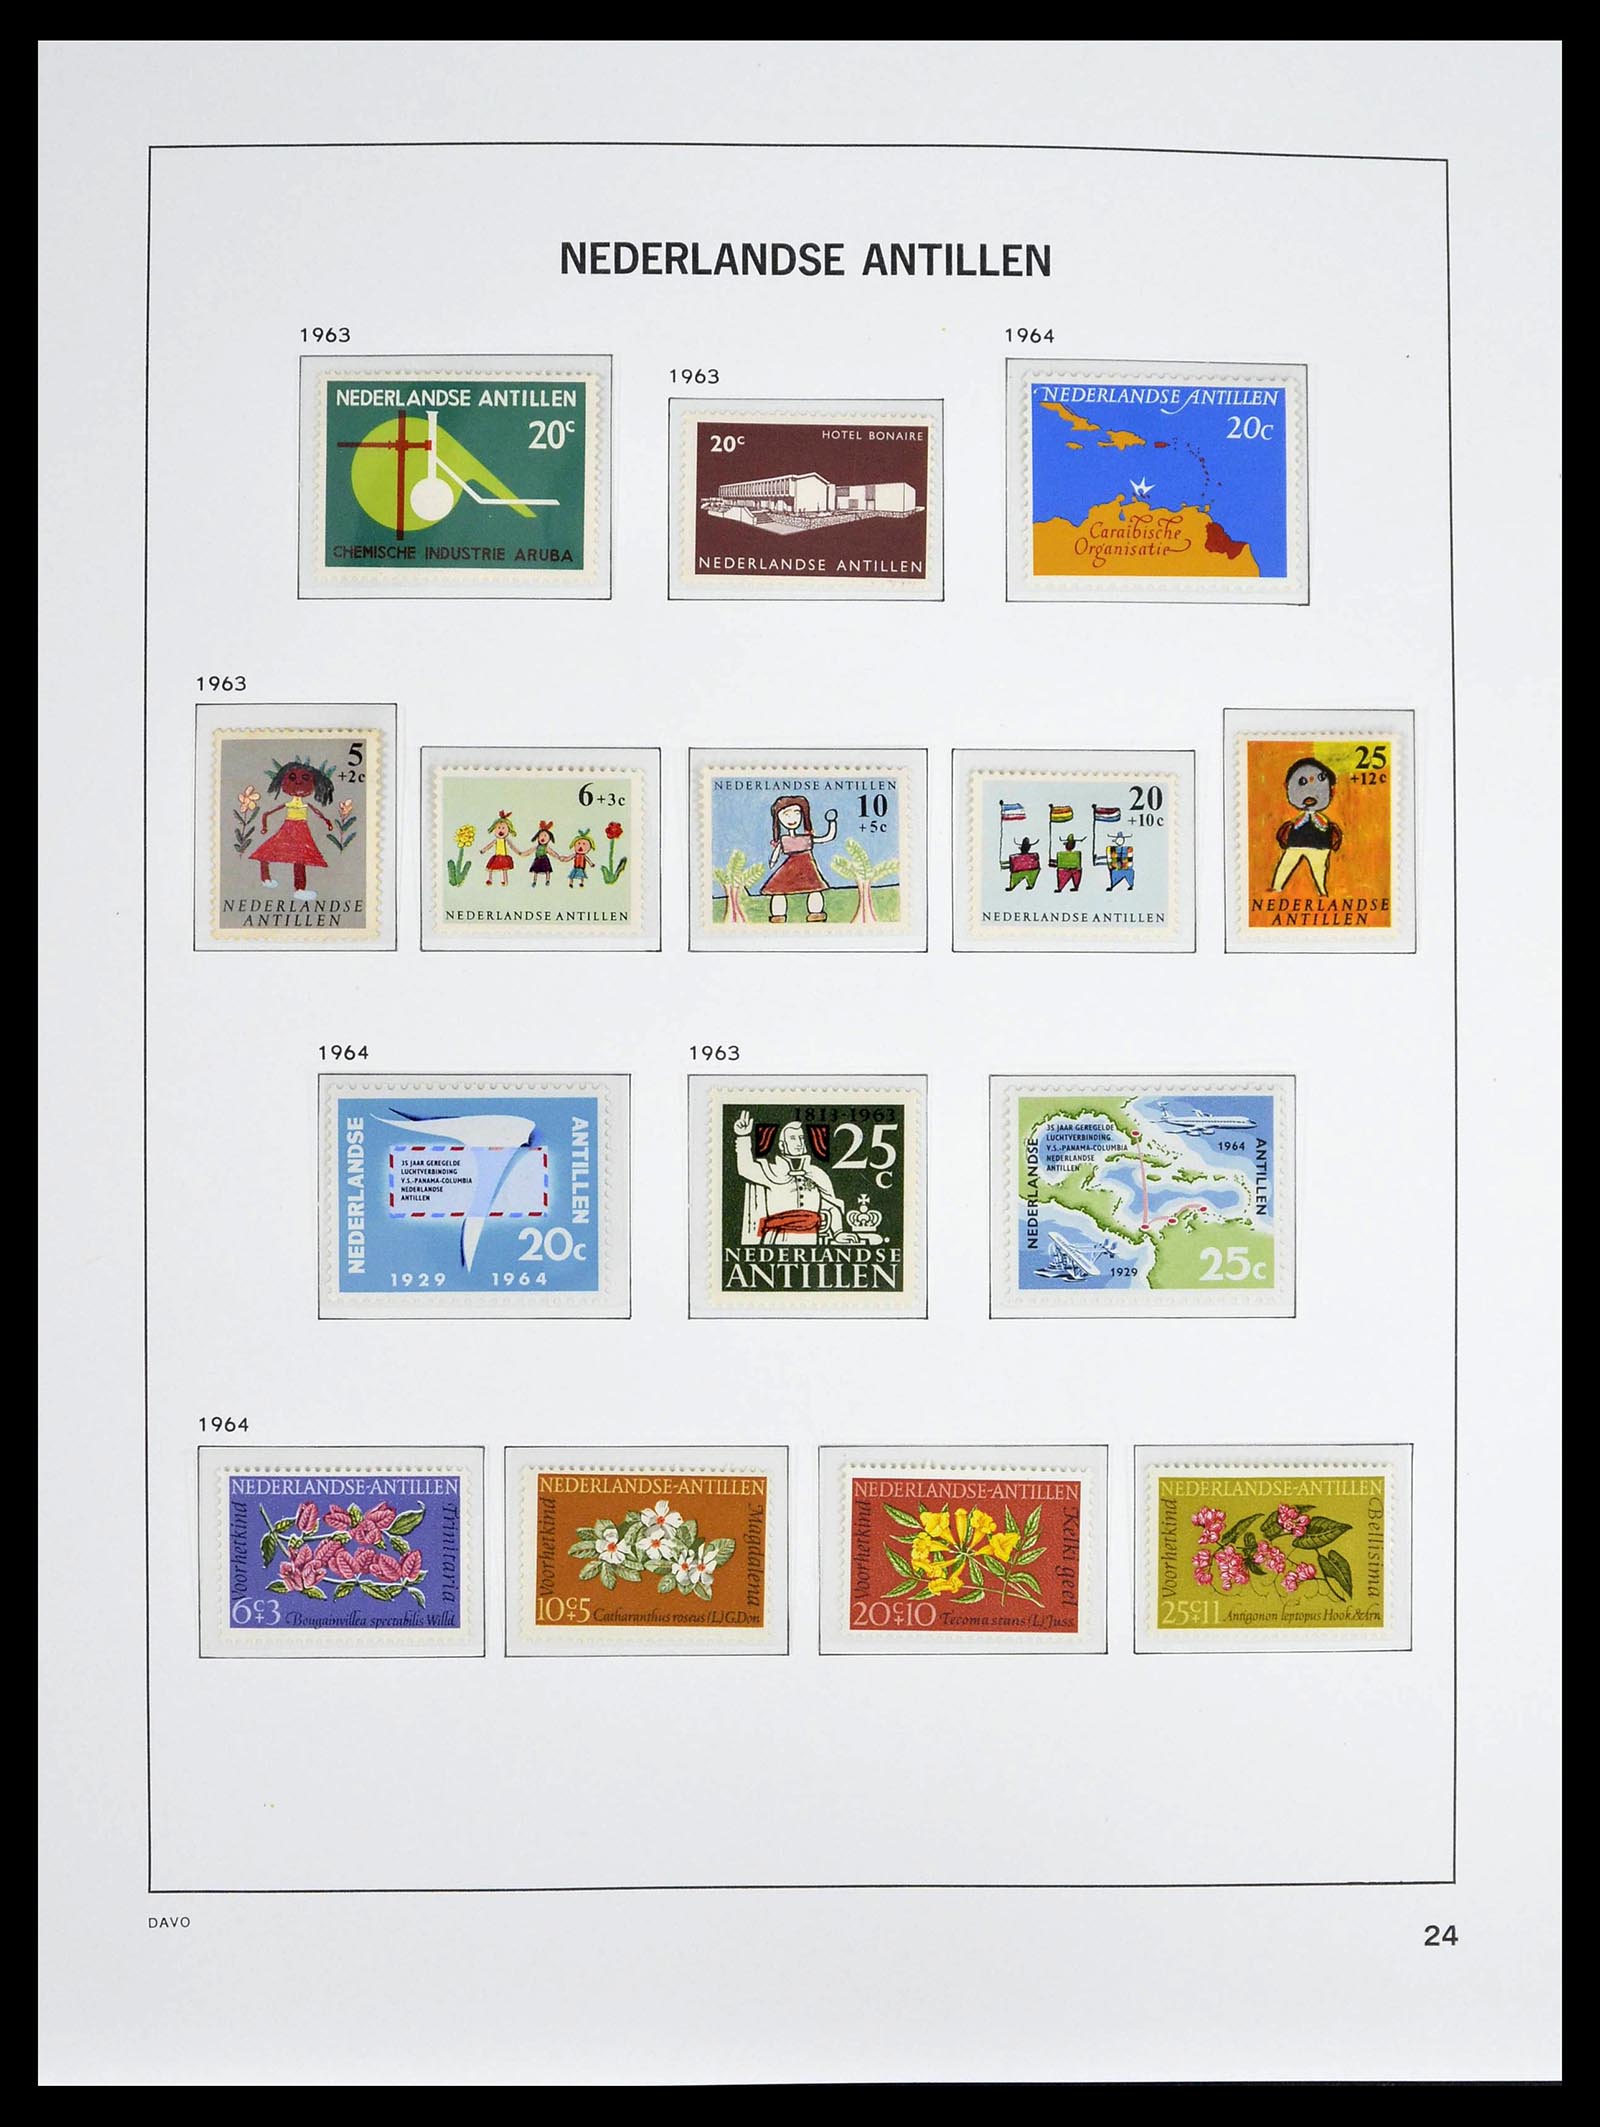 39360 0025 - Stamp collection 39360 Curaçao/Antilles complete 1873-2013.